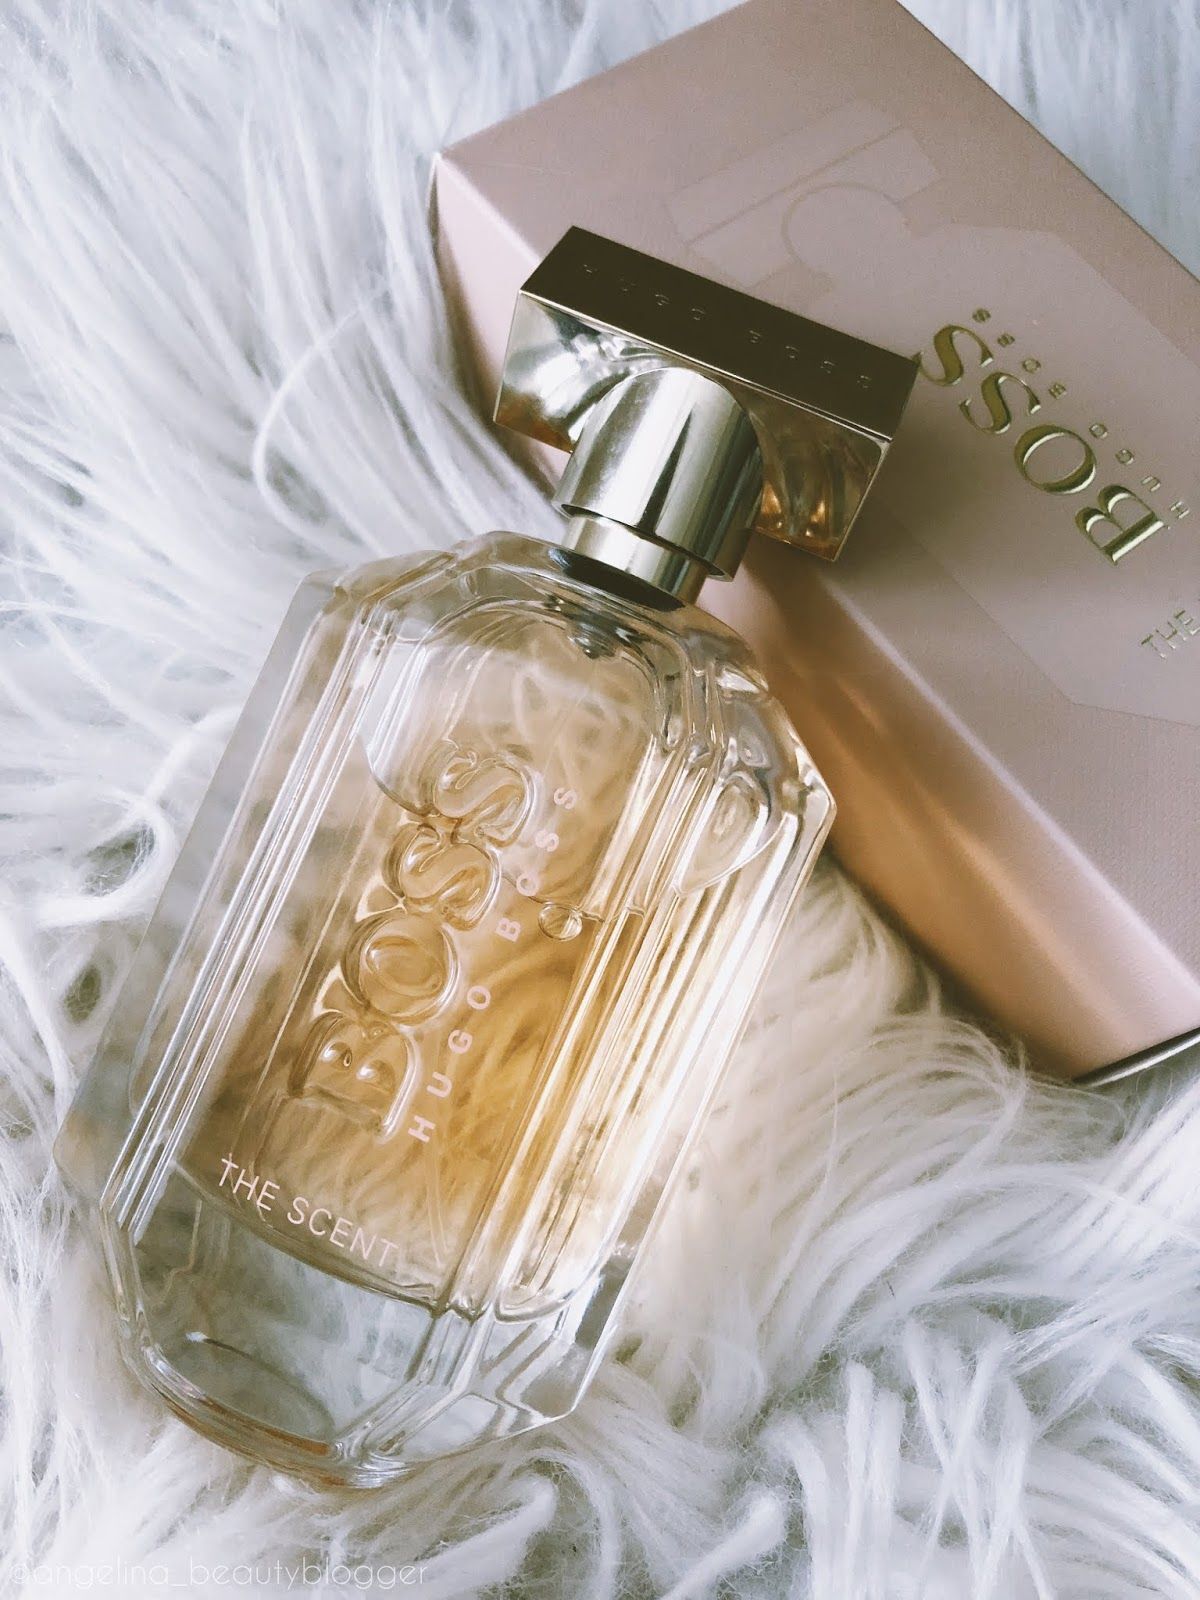 Boss for her парфюмерная вода. Hugo Boss the Scent for her EDP, 100 ml. Духи Hugo Boss the Scent for her. Hugo Boss the Scent for her (100 мл.). Hugo Boss Boss the Scent, 100 ml.